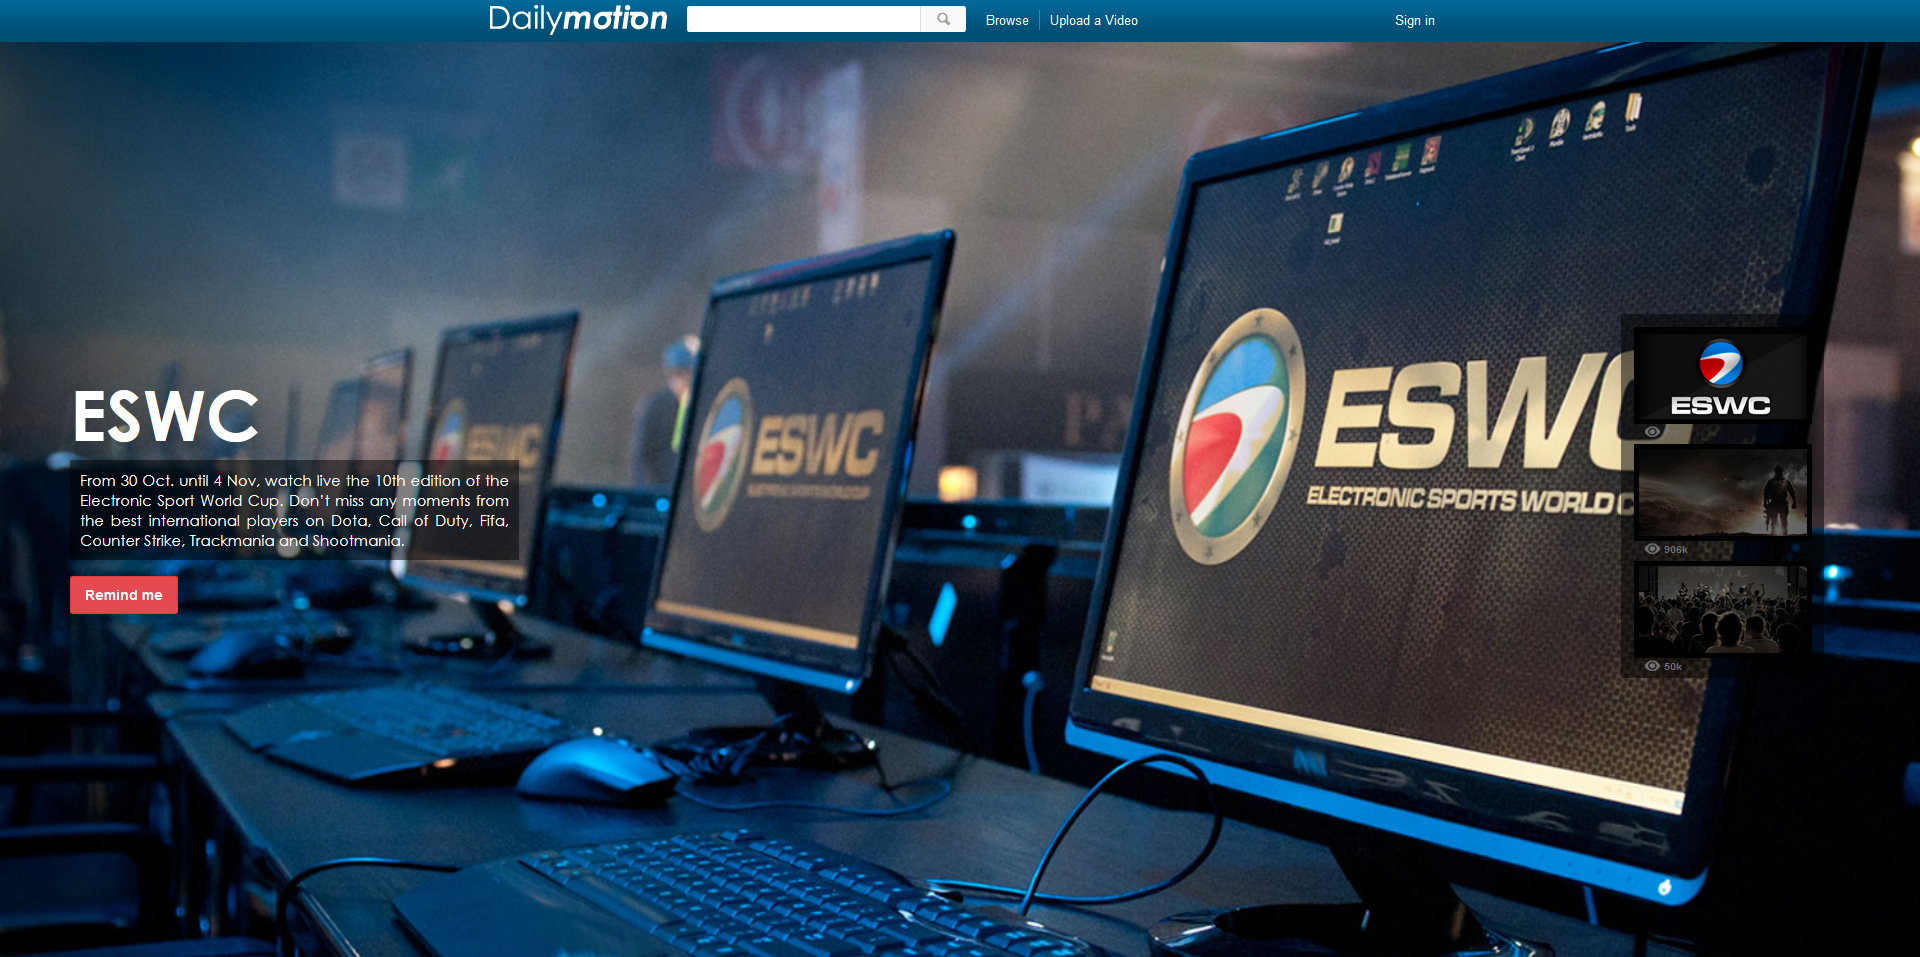 Dailymotion to exclusively broadcast eSports competitions ESWC and ASUS RoG to millions of fans